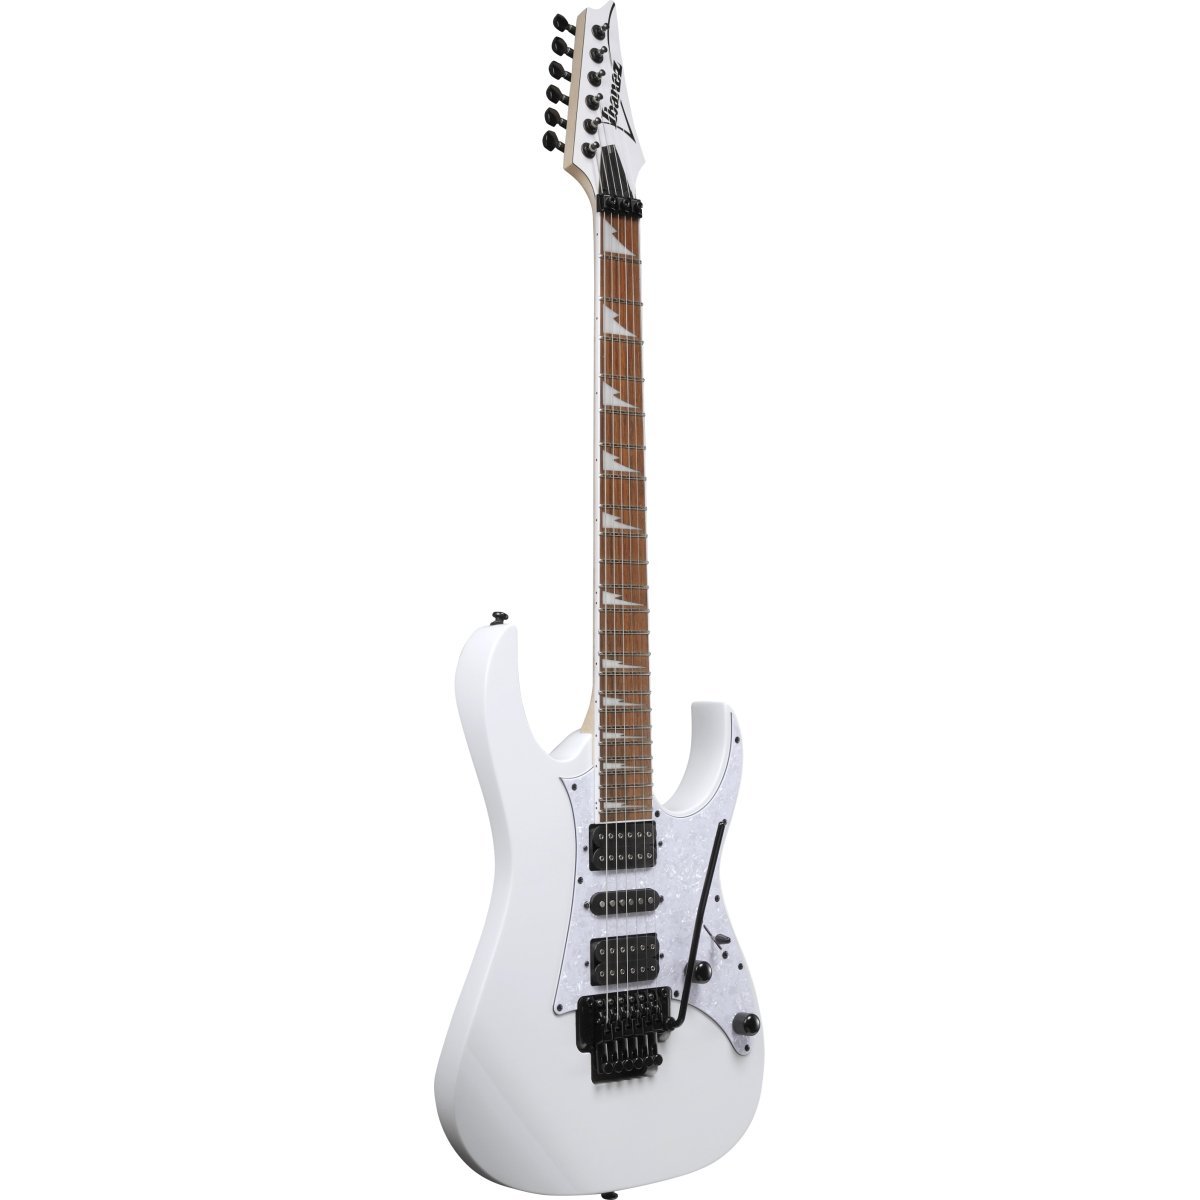 Ibanez RG450DXB-WH (White) アイバニーズ エレキギター【WEBSHOP 